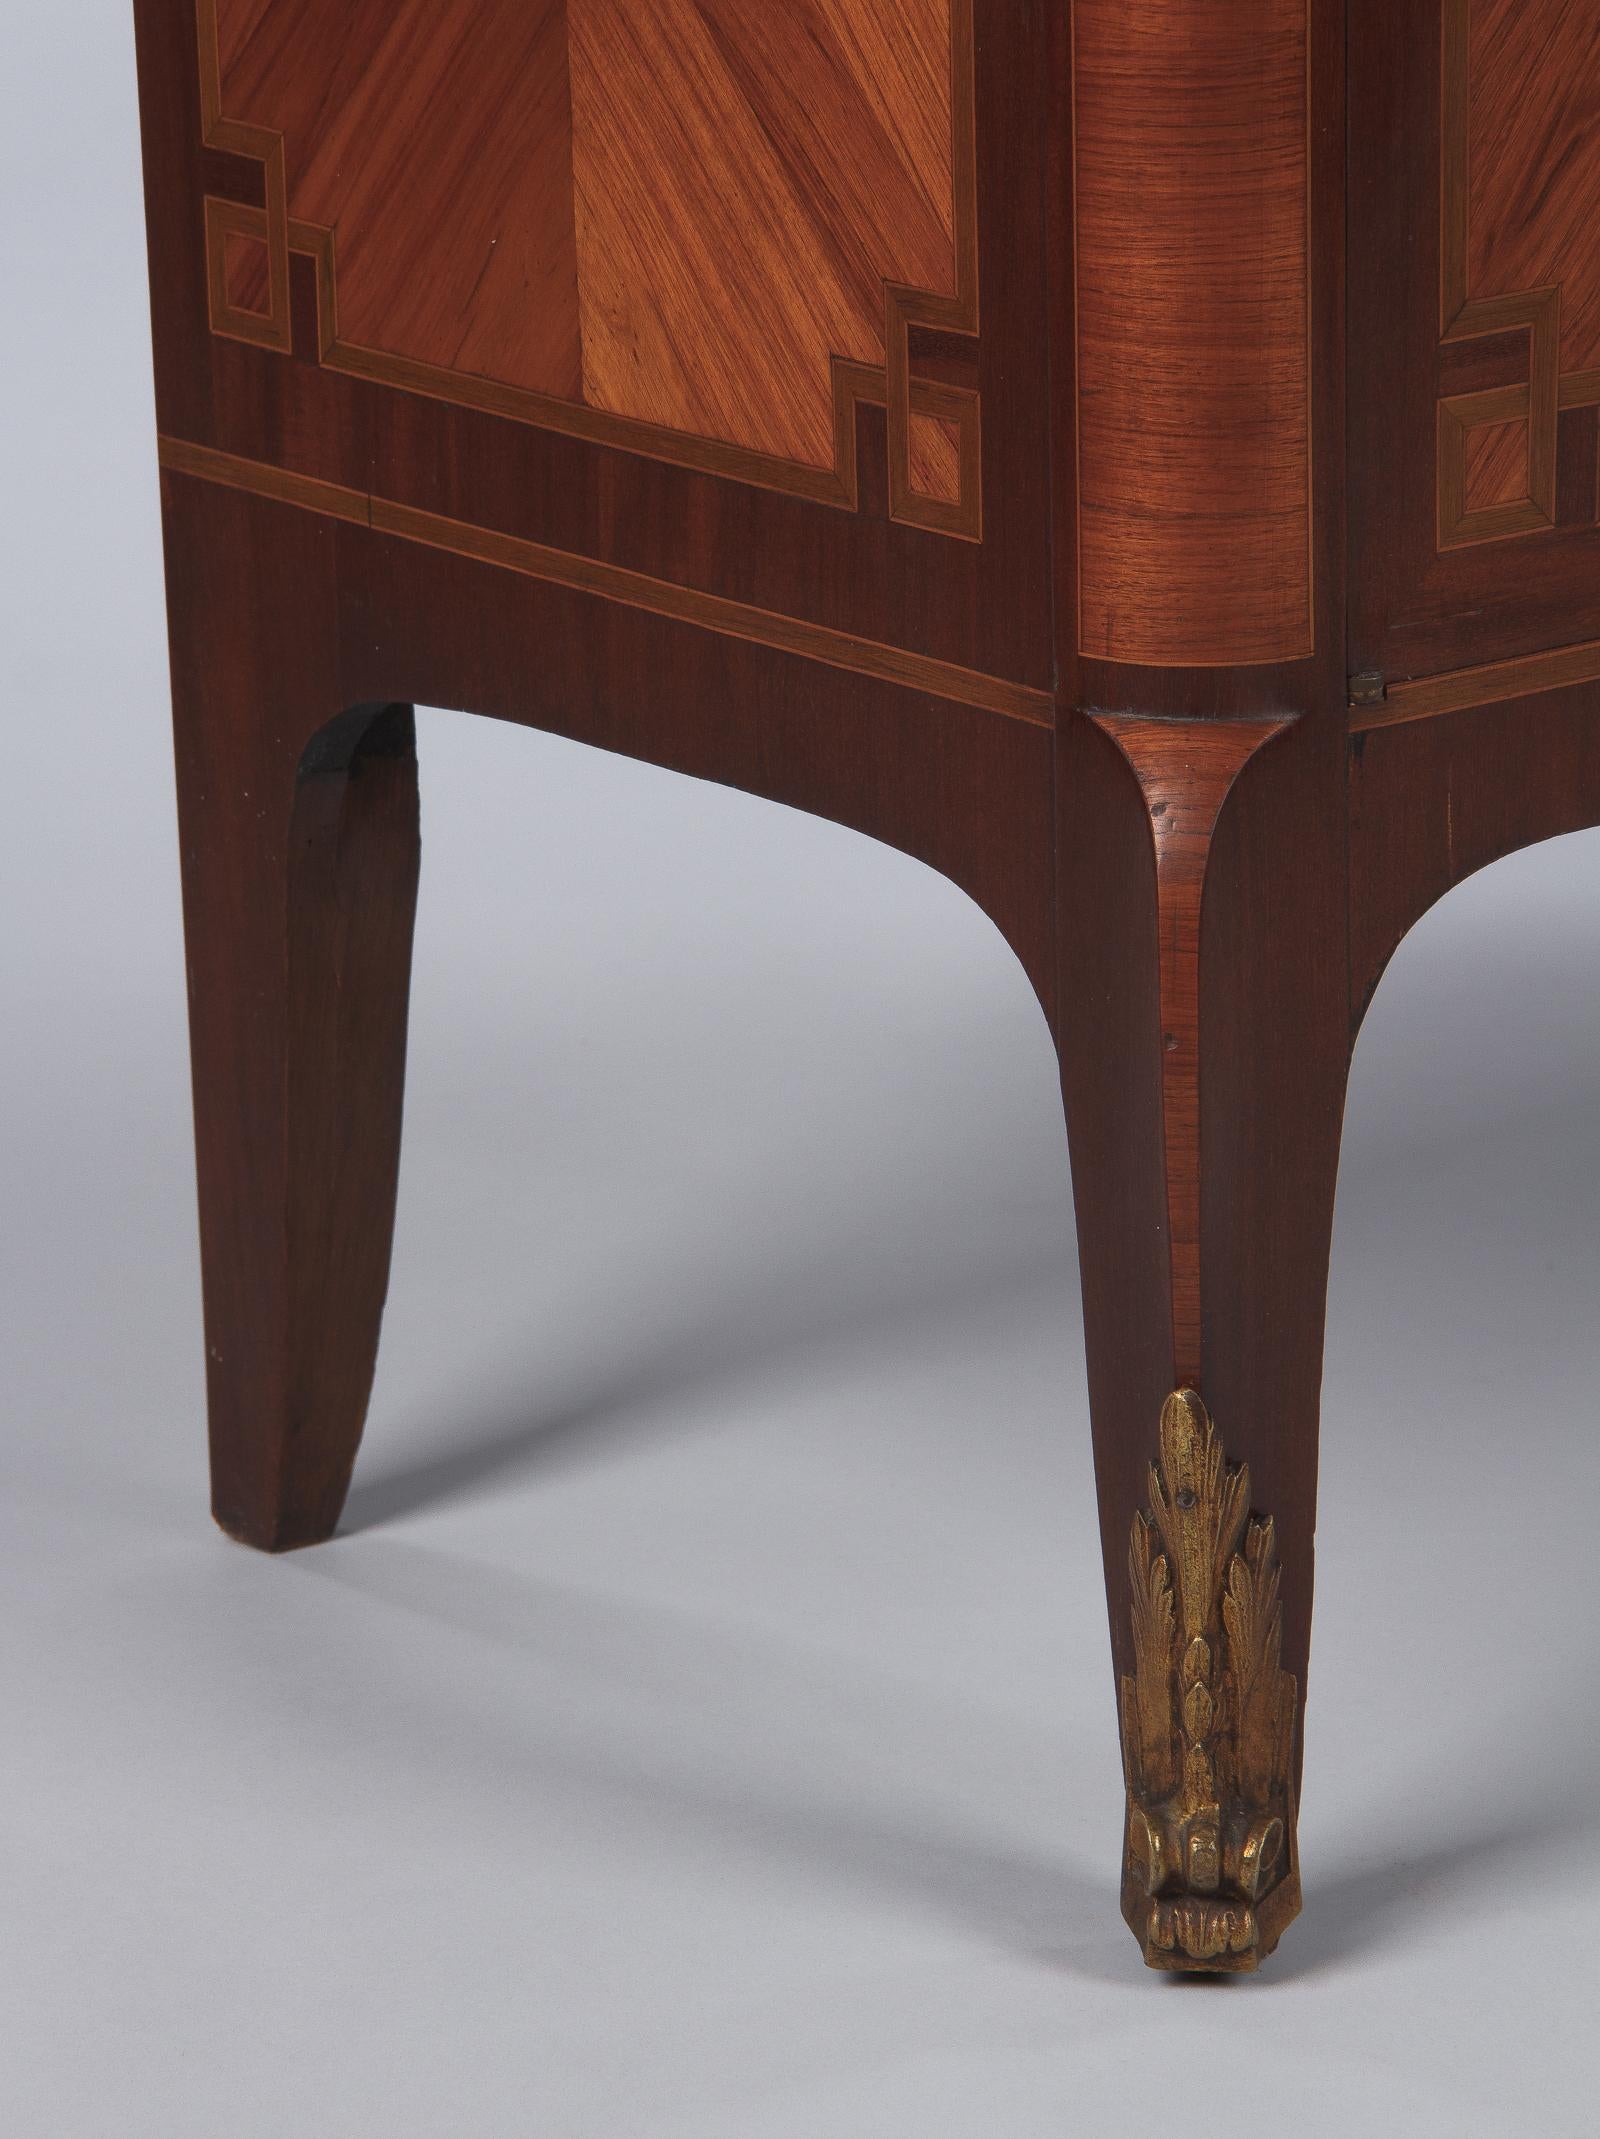 French Transition Style Marquetry Sideboard with Marble Top, 1900s (20. Jahrhundert)